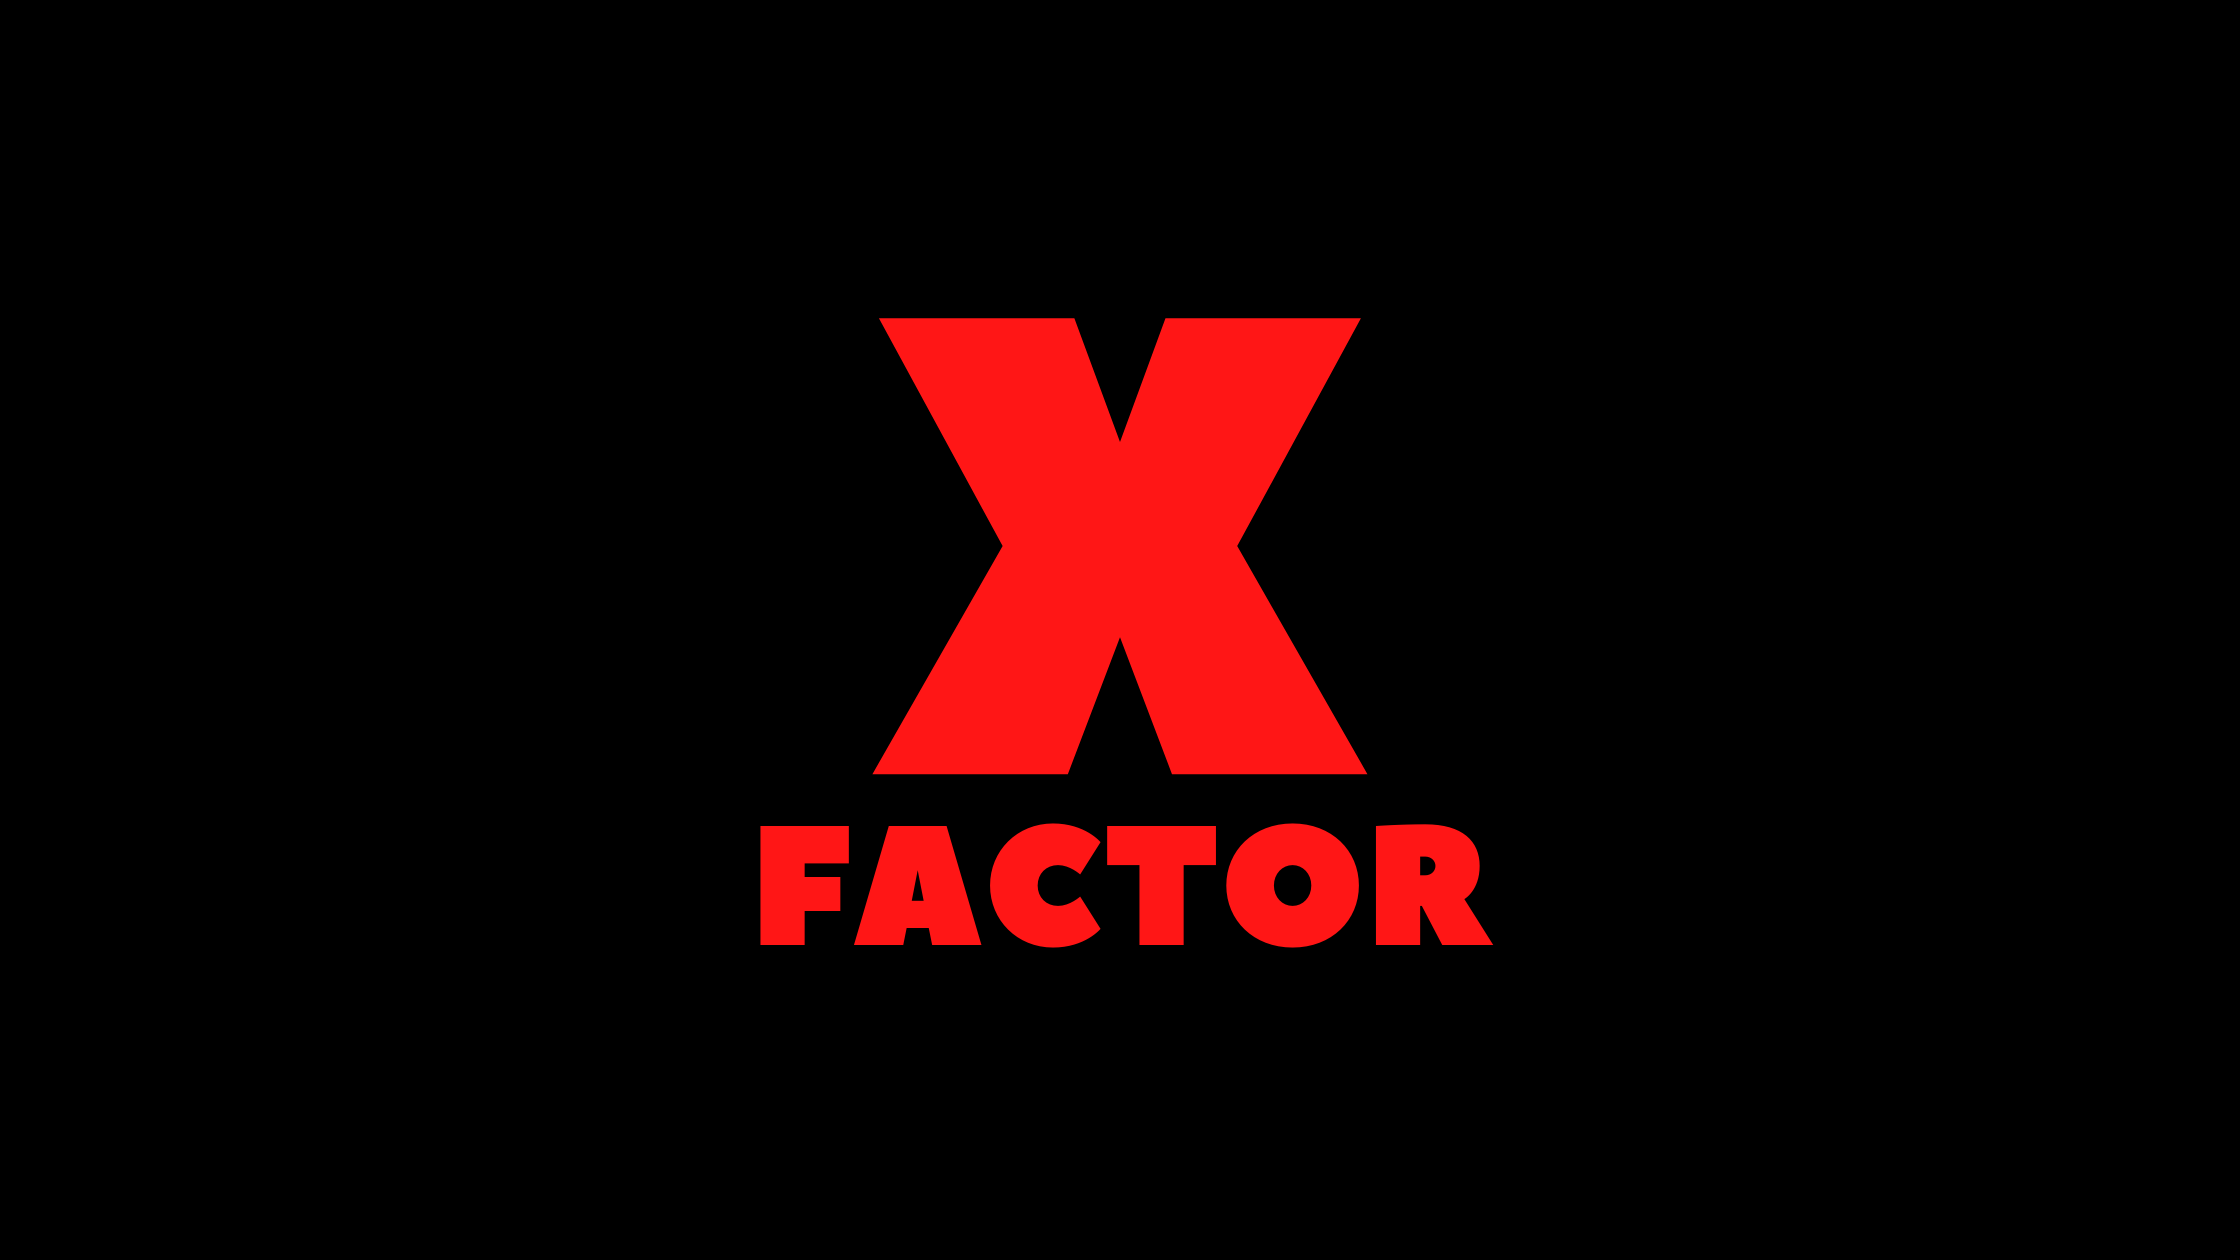 X Factor Audition